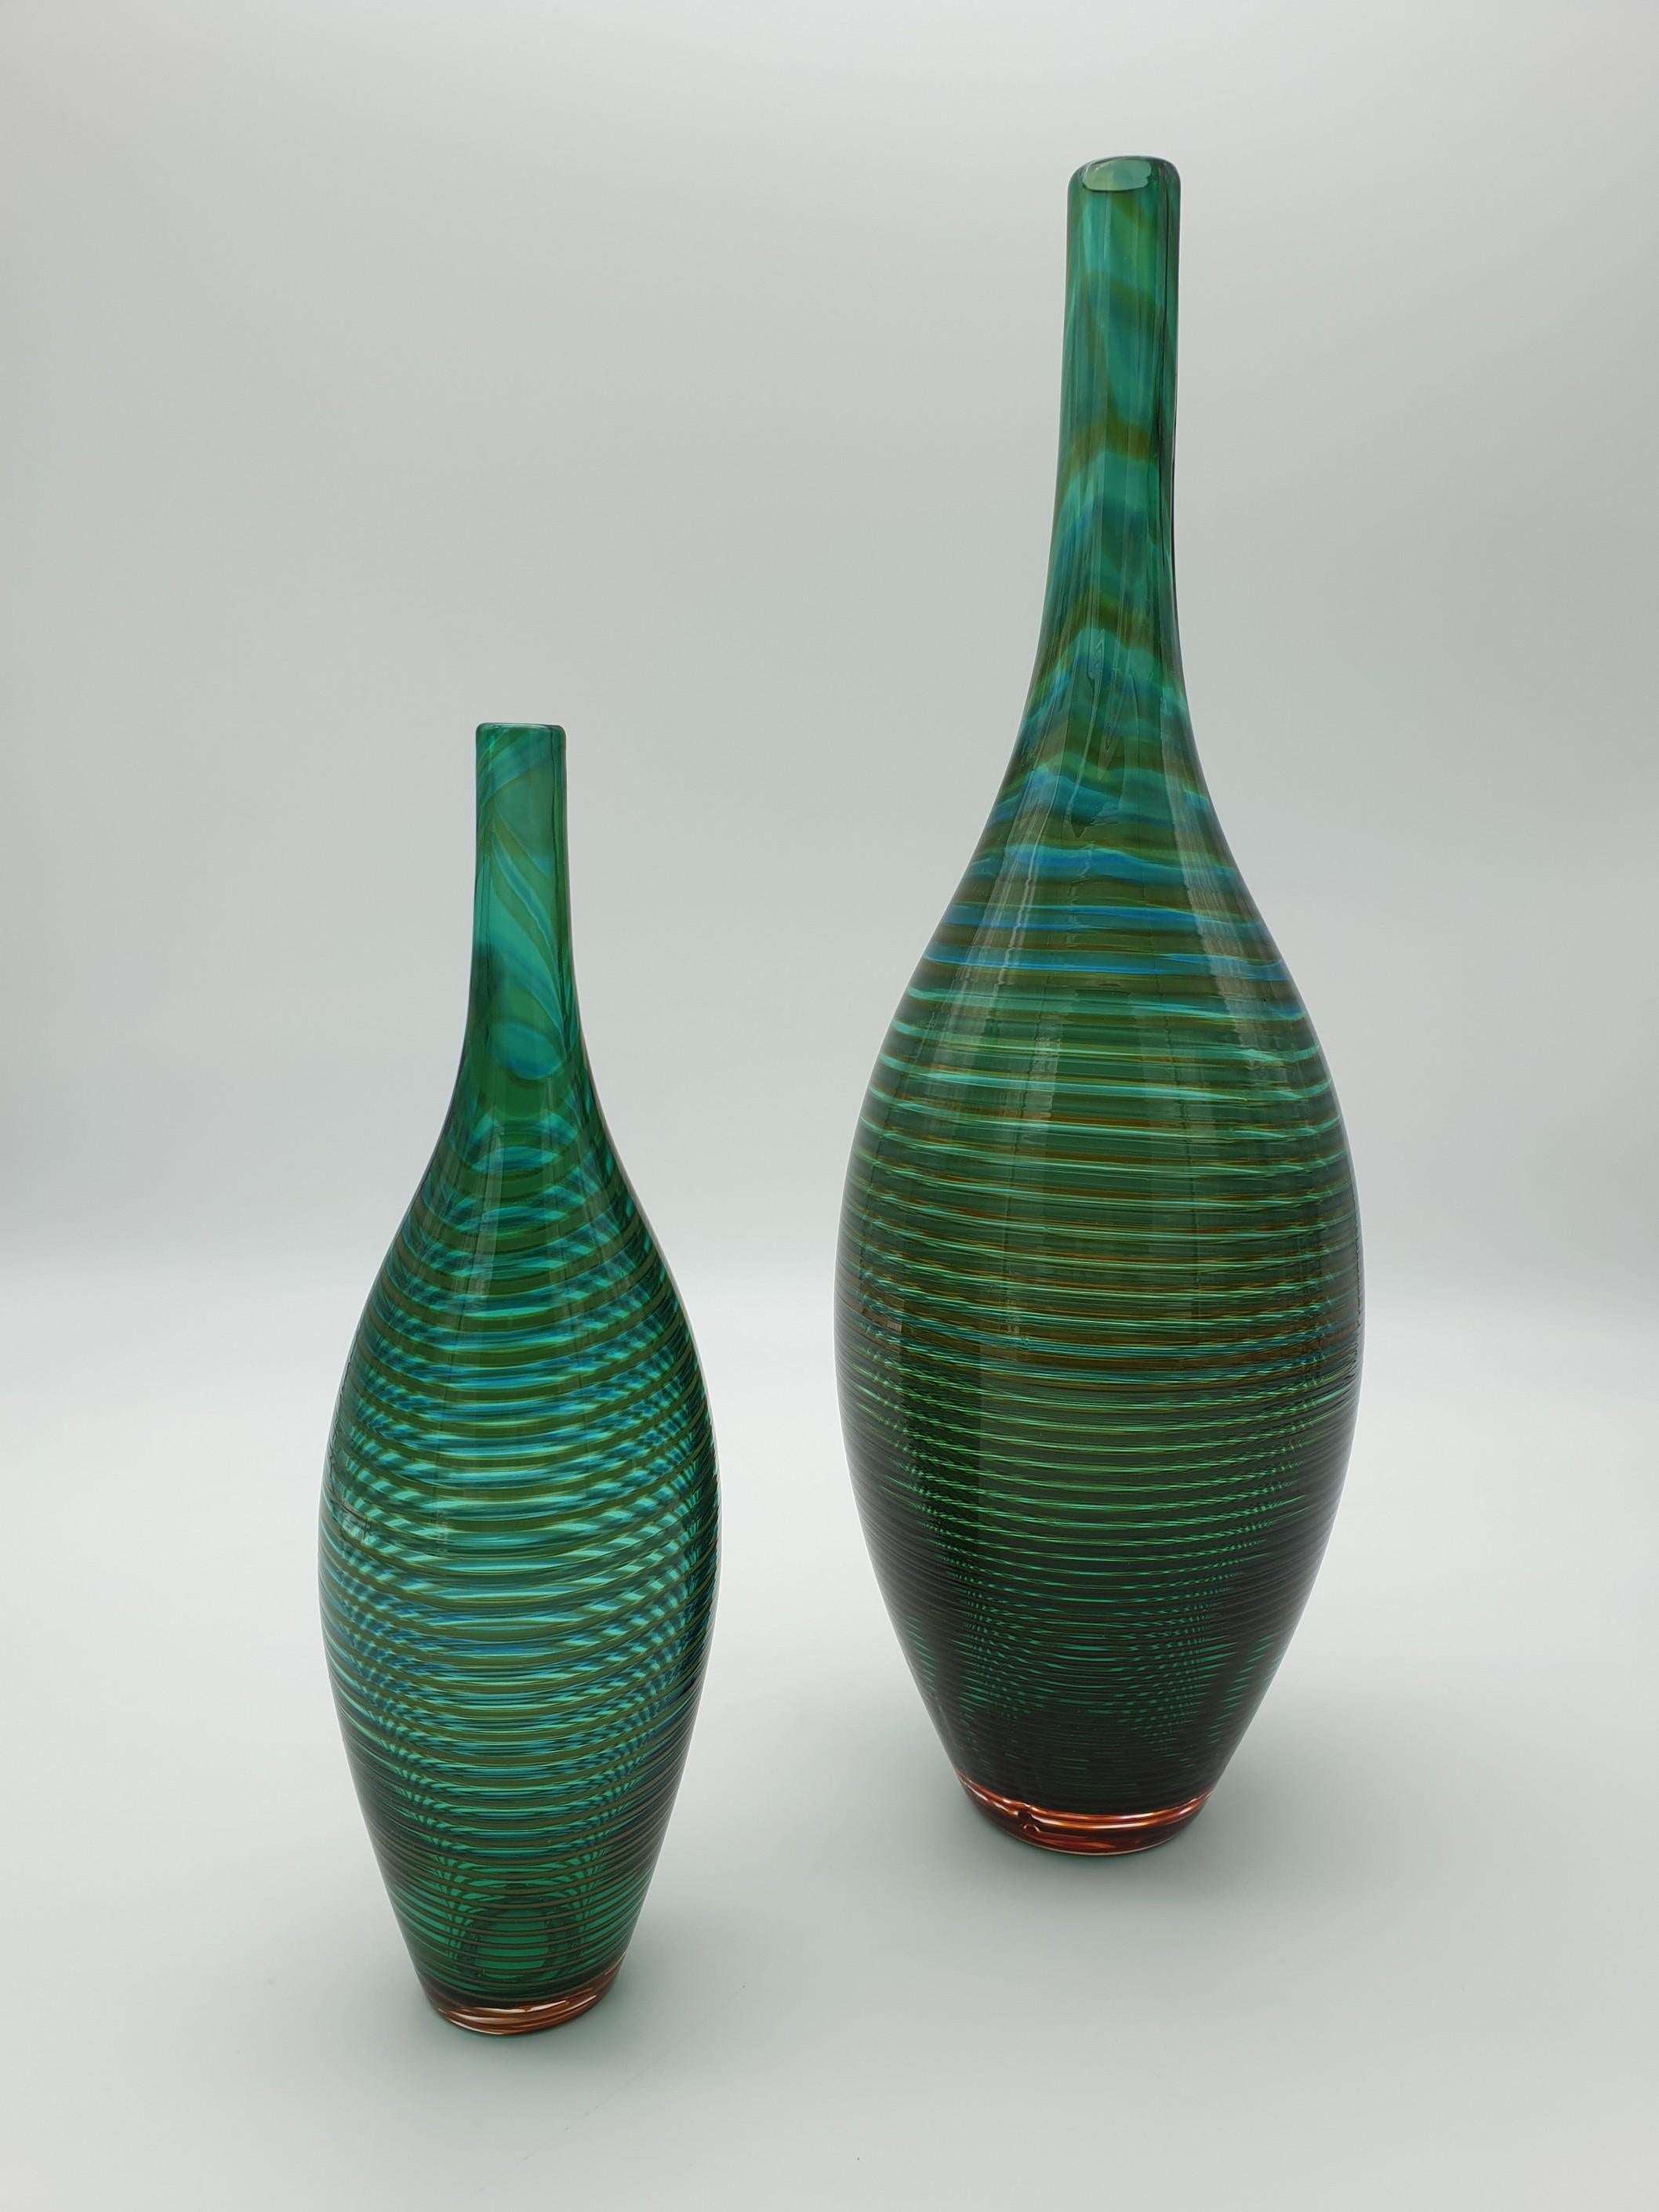 Late 20th Century Decorative Murano Glass Bottles by Cenedese, Green and Amber Color, 1980s For Sale